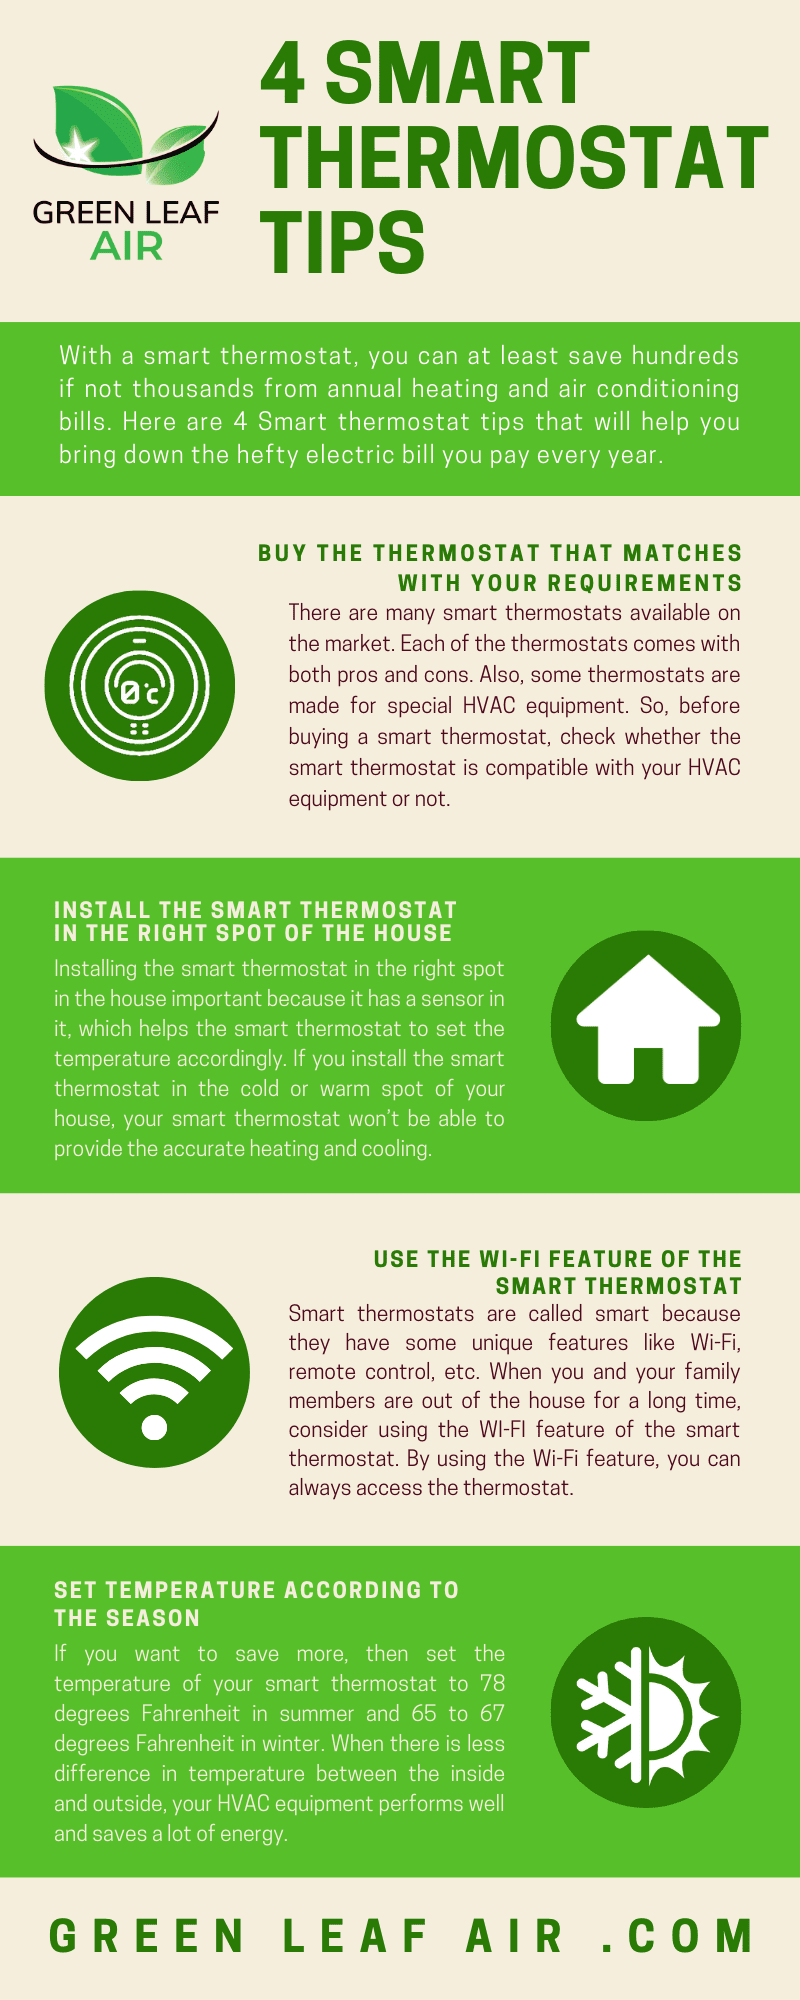 4 Smart Thermostat Tips